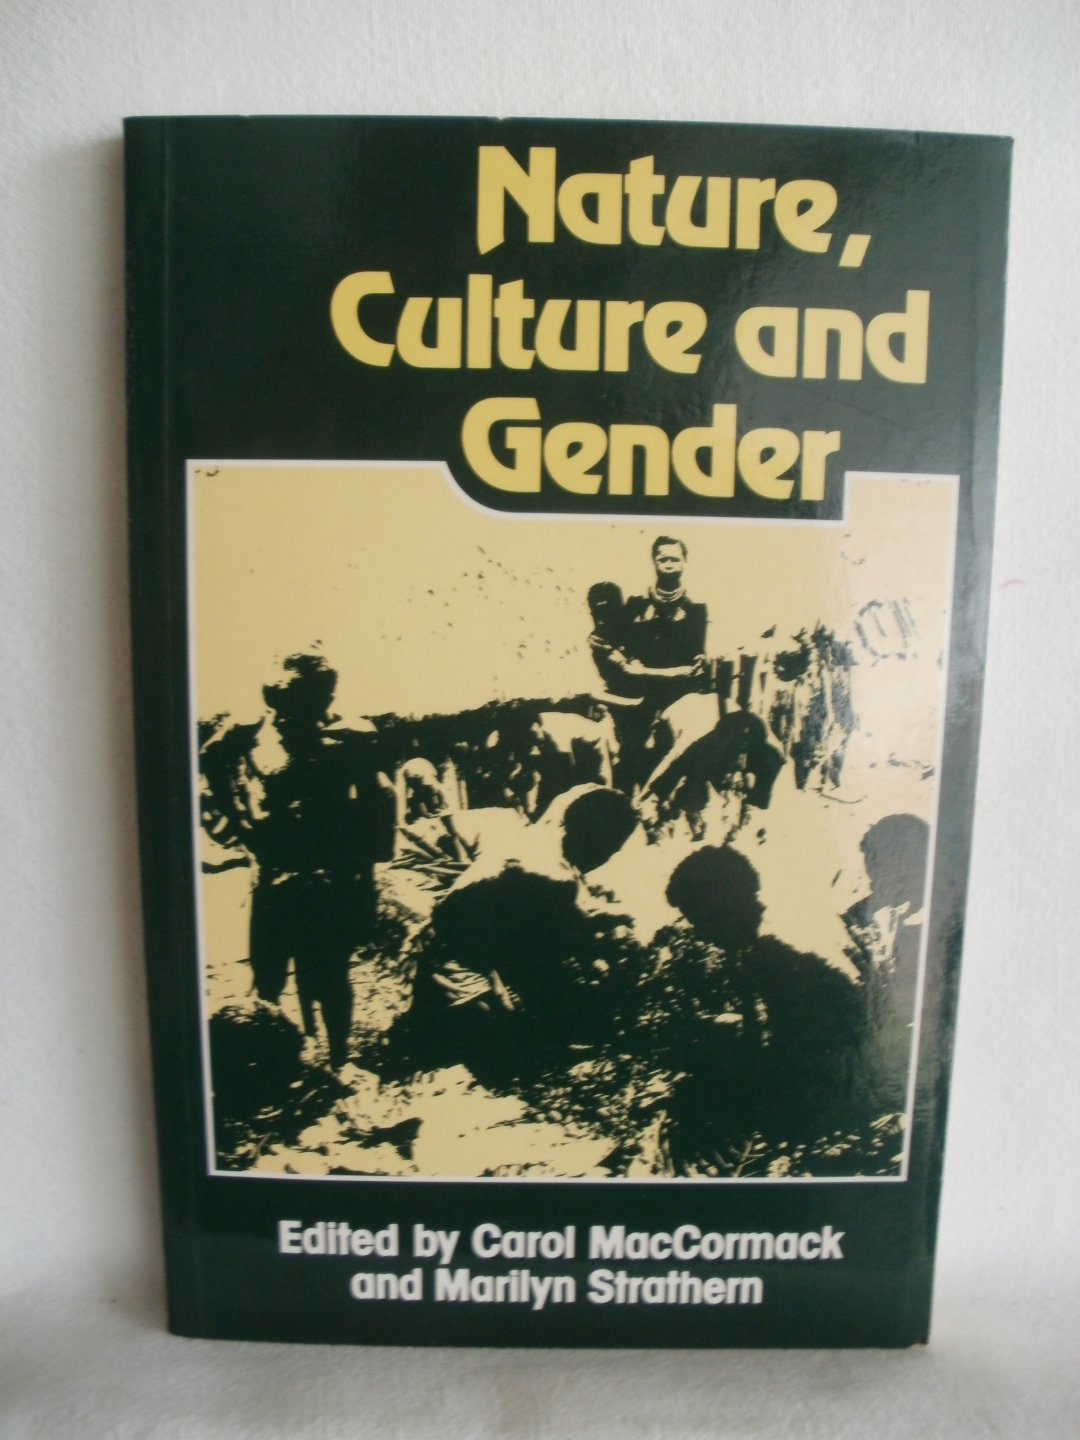 MacCormack, Carol/ Stratthern, Marilyn (eds.) - Nature, Culture and Gender